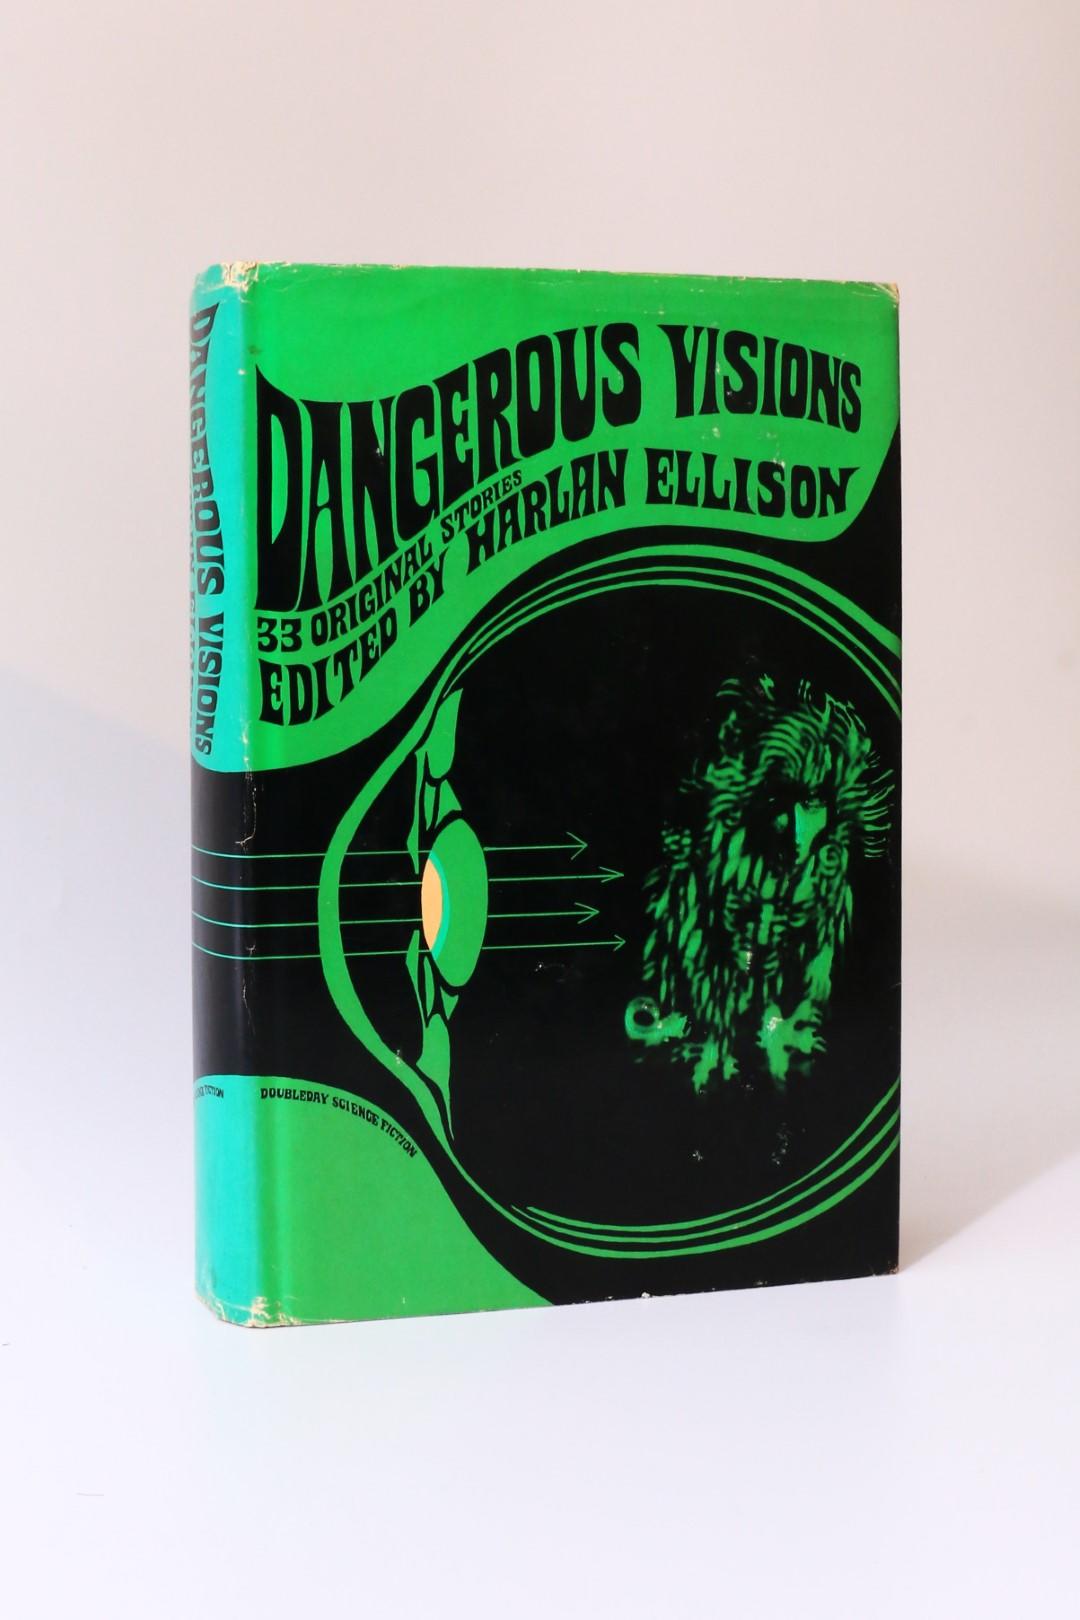 Harlan Ellison [ed.] - Dangerous Visions - Doubleday, 1967, First Edition.